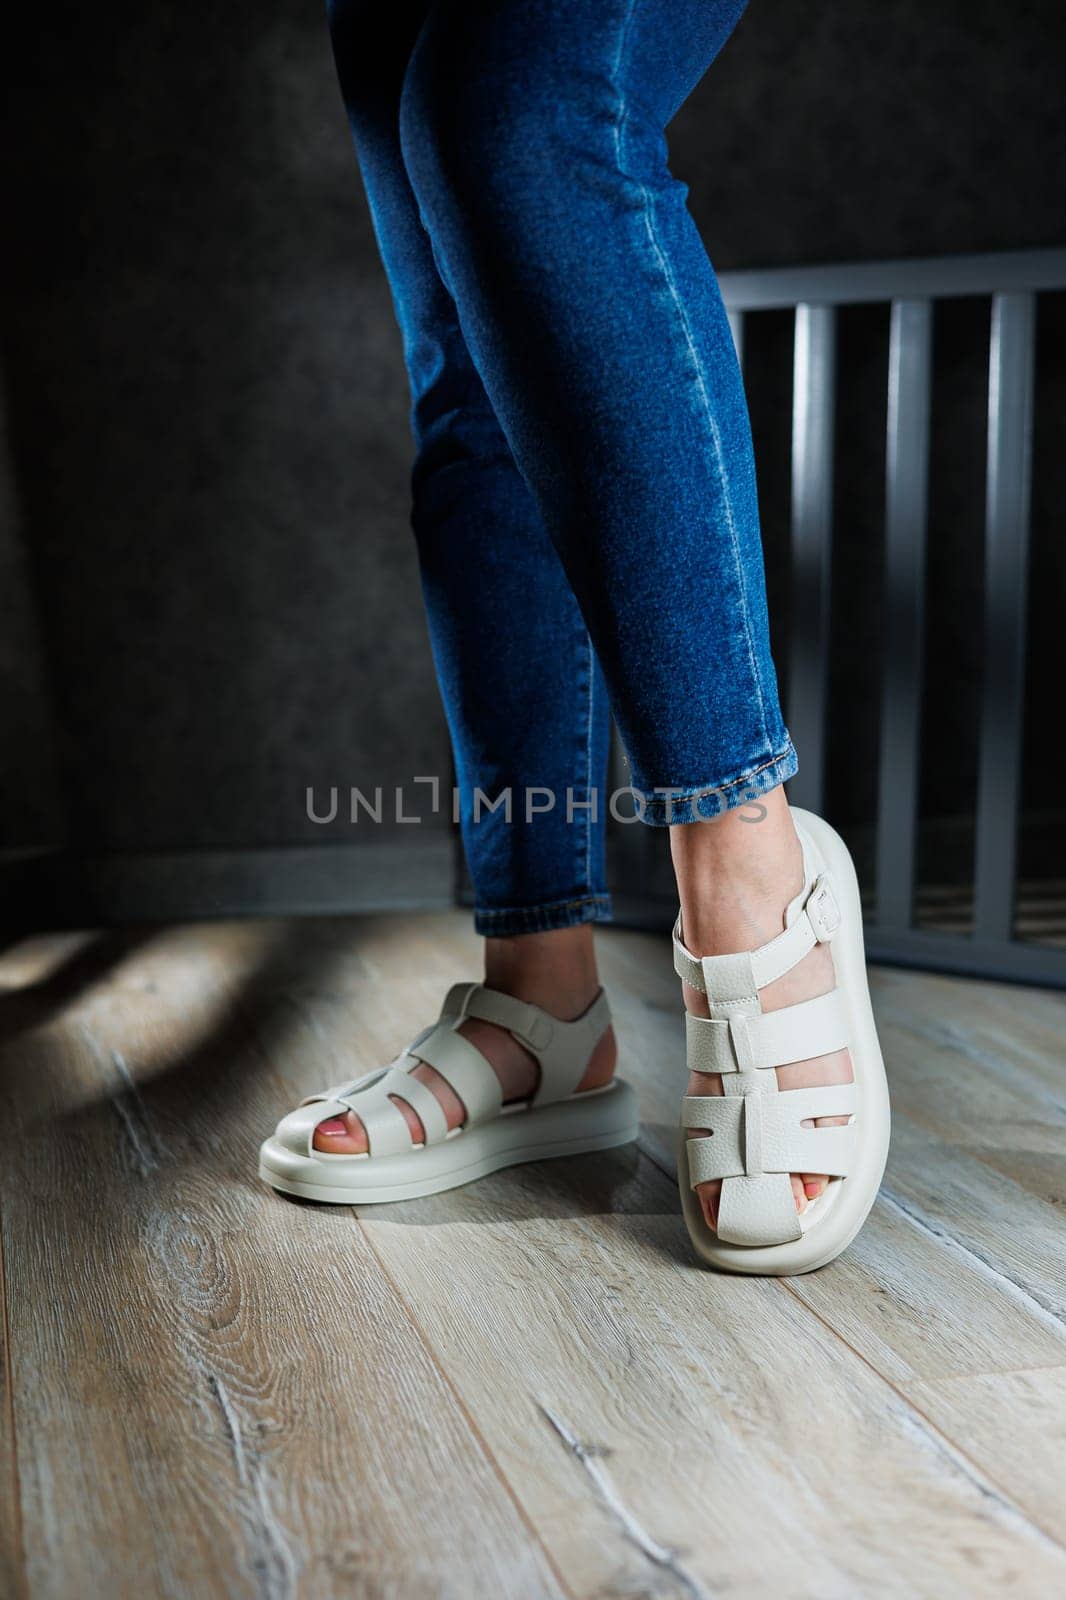 Slender female legs in beige leather sandals without heels. Collection of women's summer sandals. by Dmitrytph